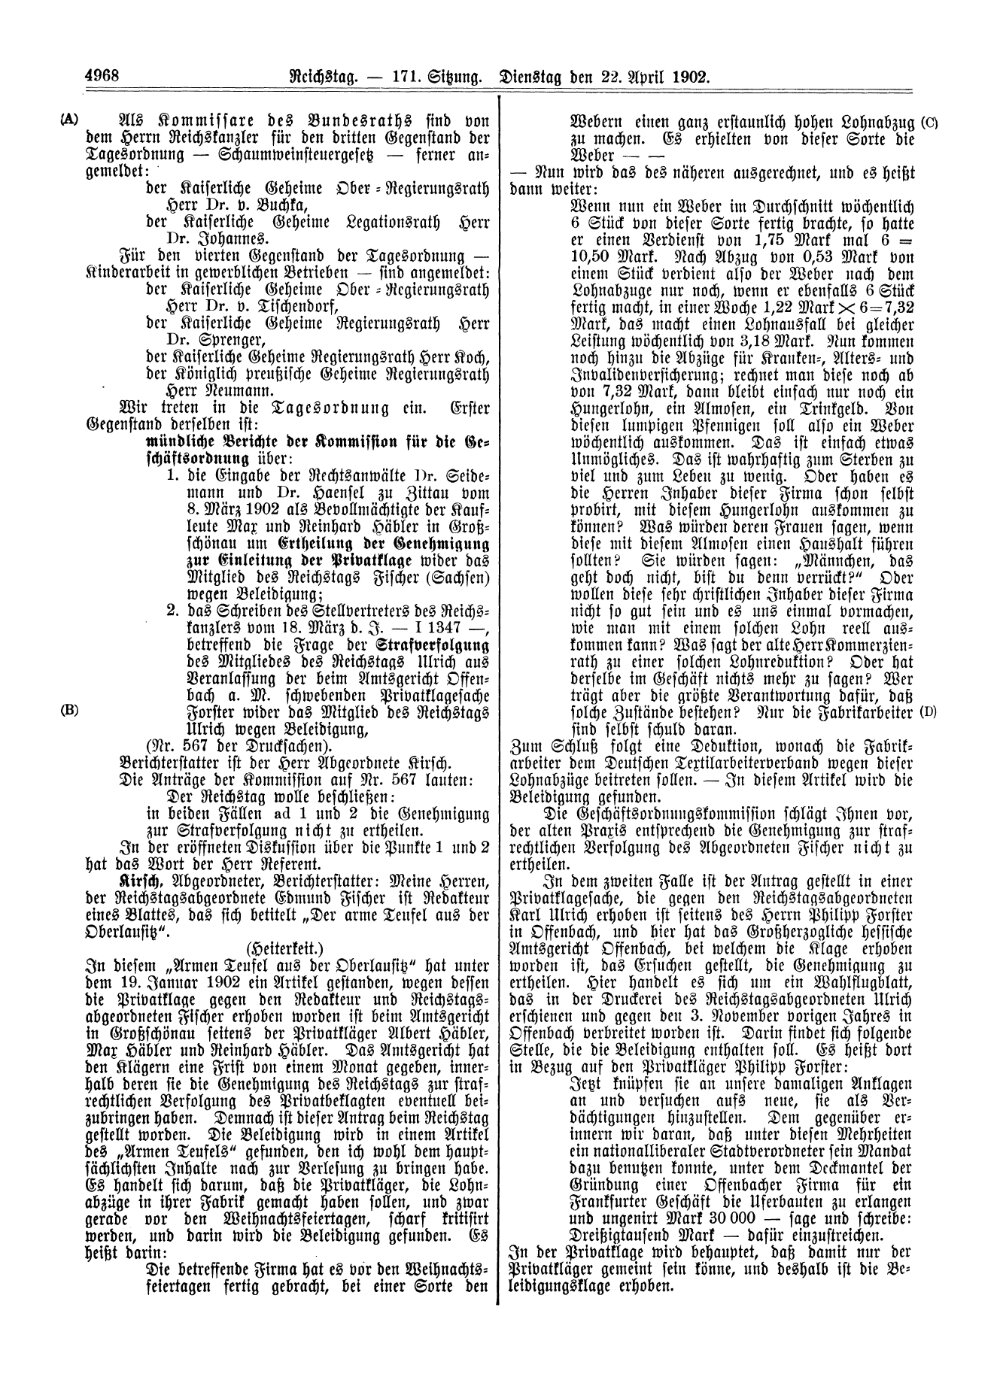 Scan of page 4968